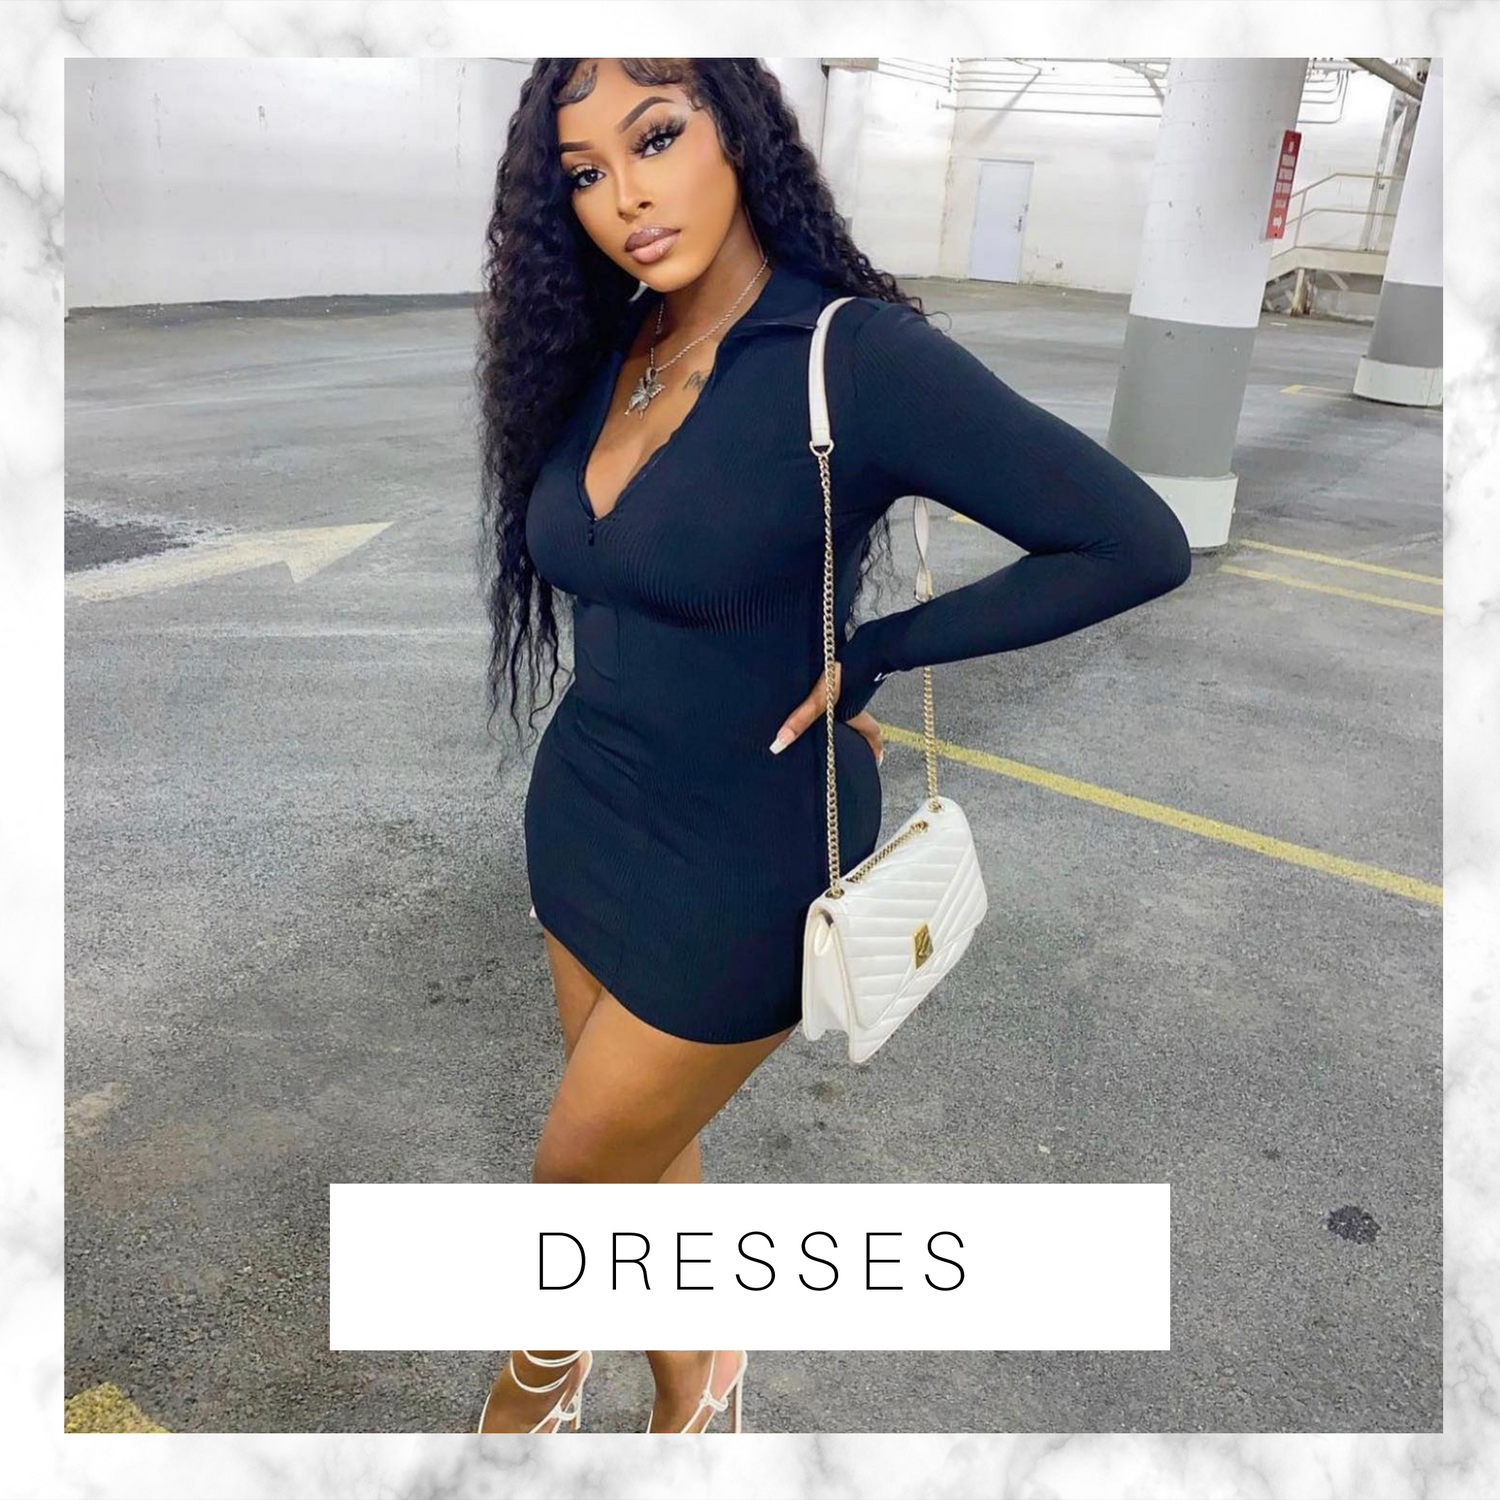 Slay effortlessly in our latest hottest dresses. Whether you’re looking for a dress for your next big special occasion or it’s something a little more casual that you need, we've got you covered.